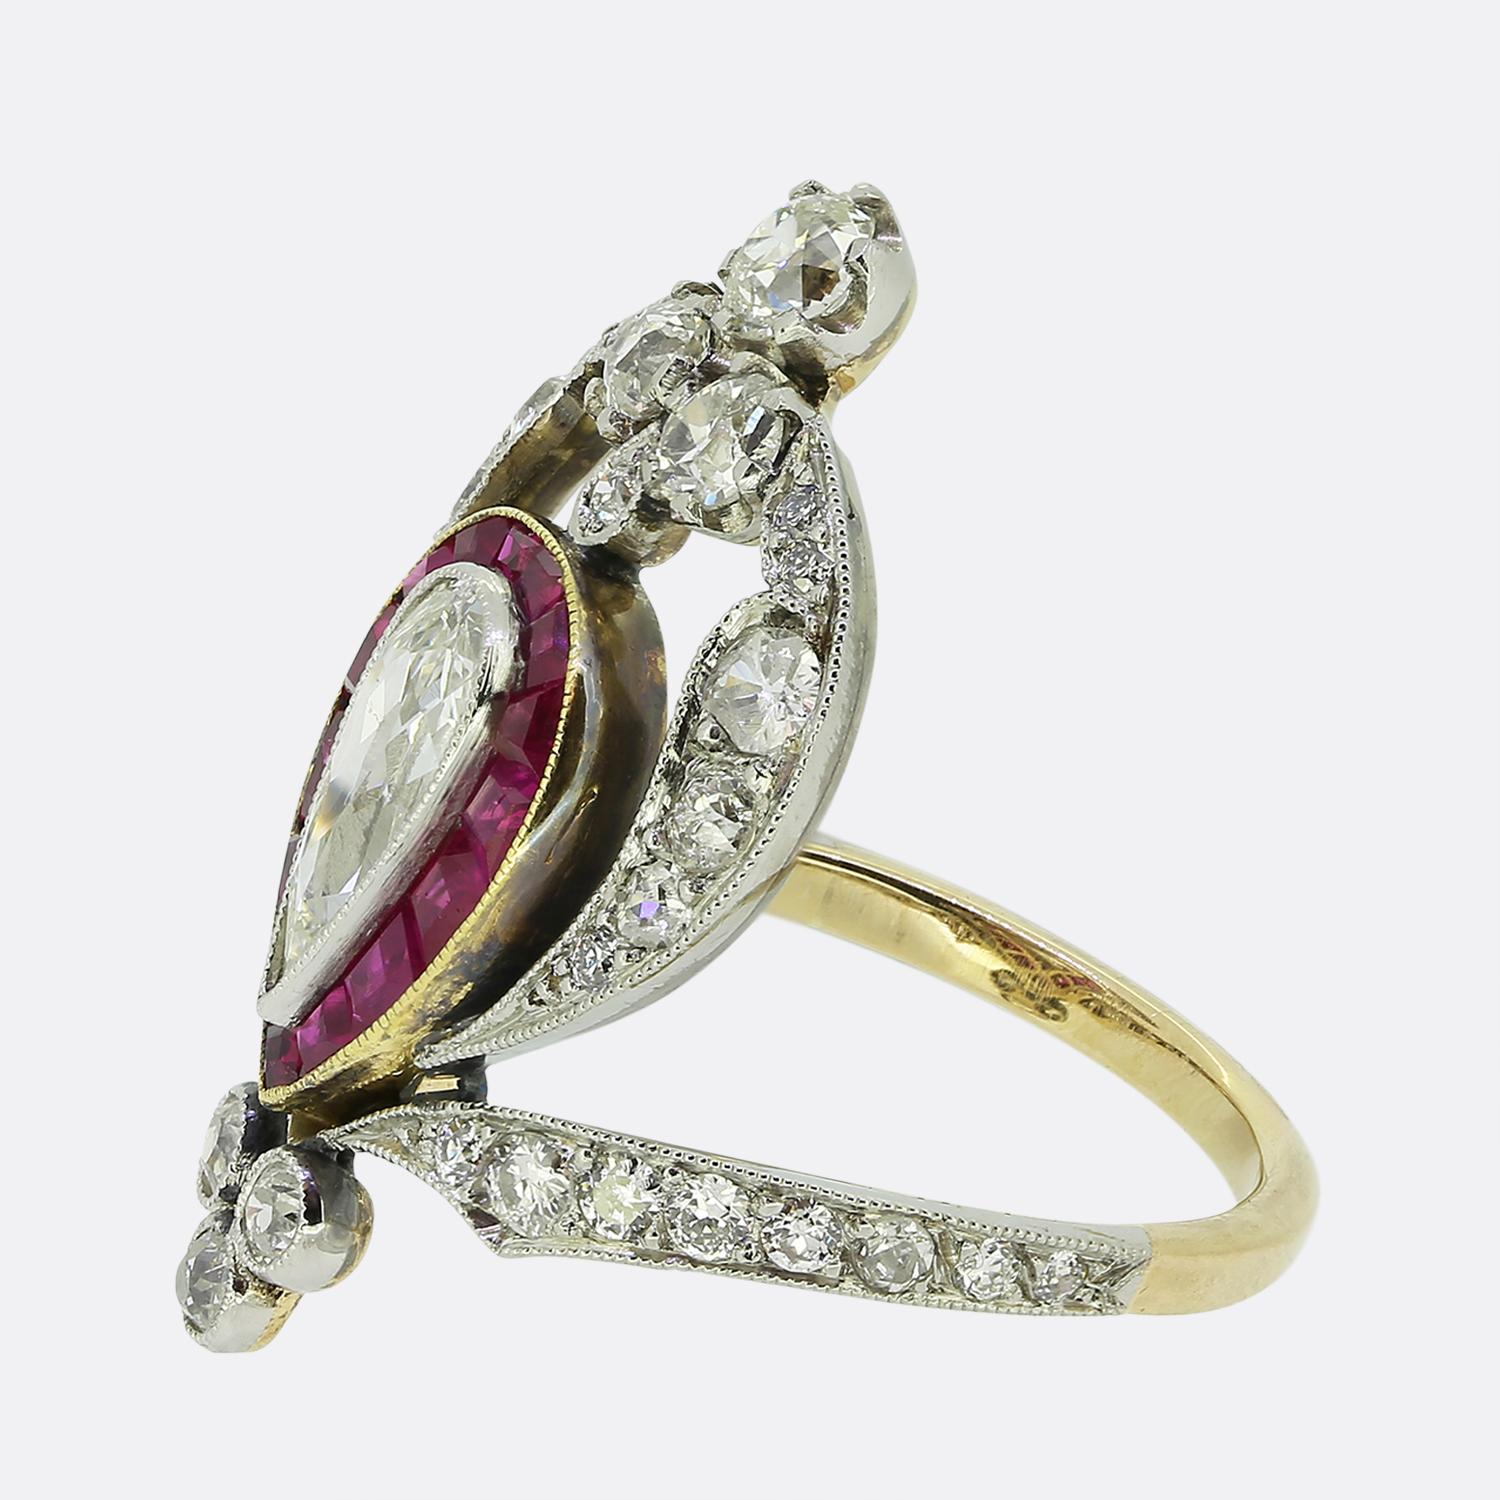 Here we have a truly outstanding ruby and diamond dress ring crafted during the Art Nouveau period. A single slim pear shaped diamond sits slightly risen at the centre of the face and is surrounded by a single row of square calibrated rubies